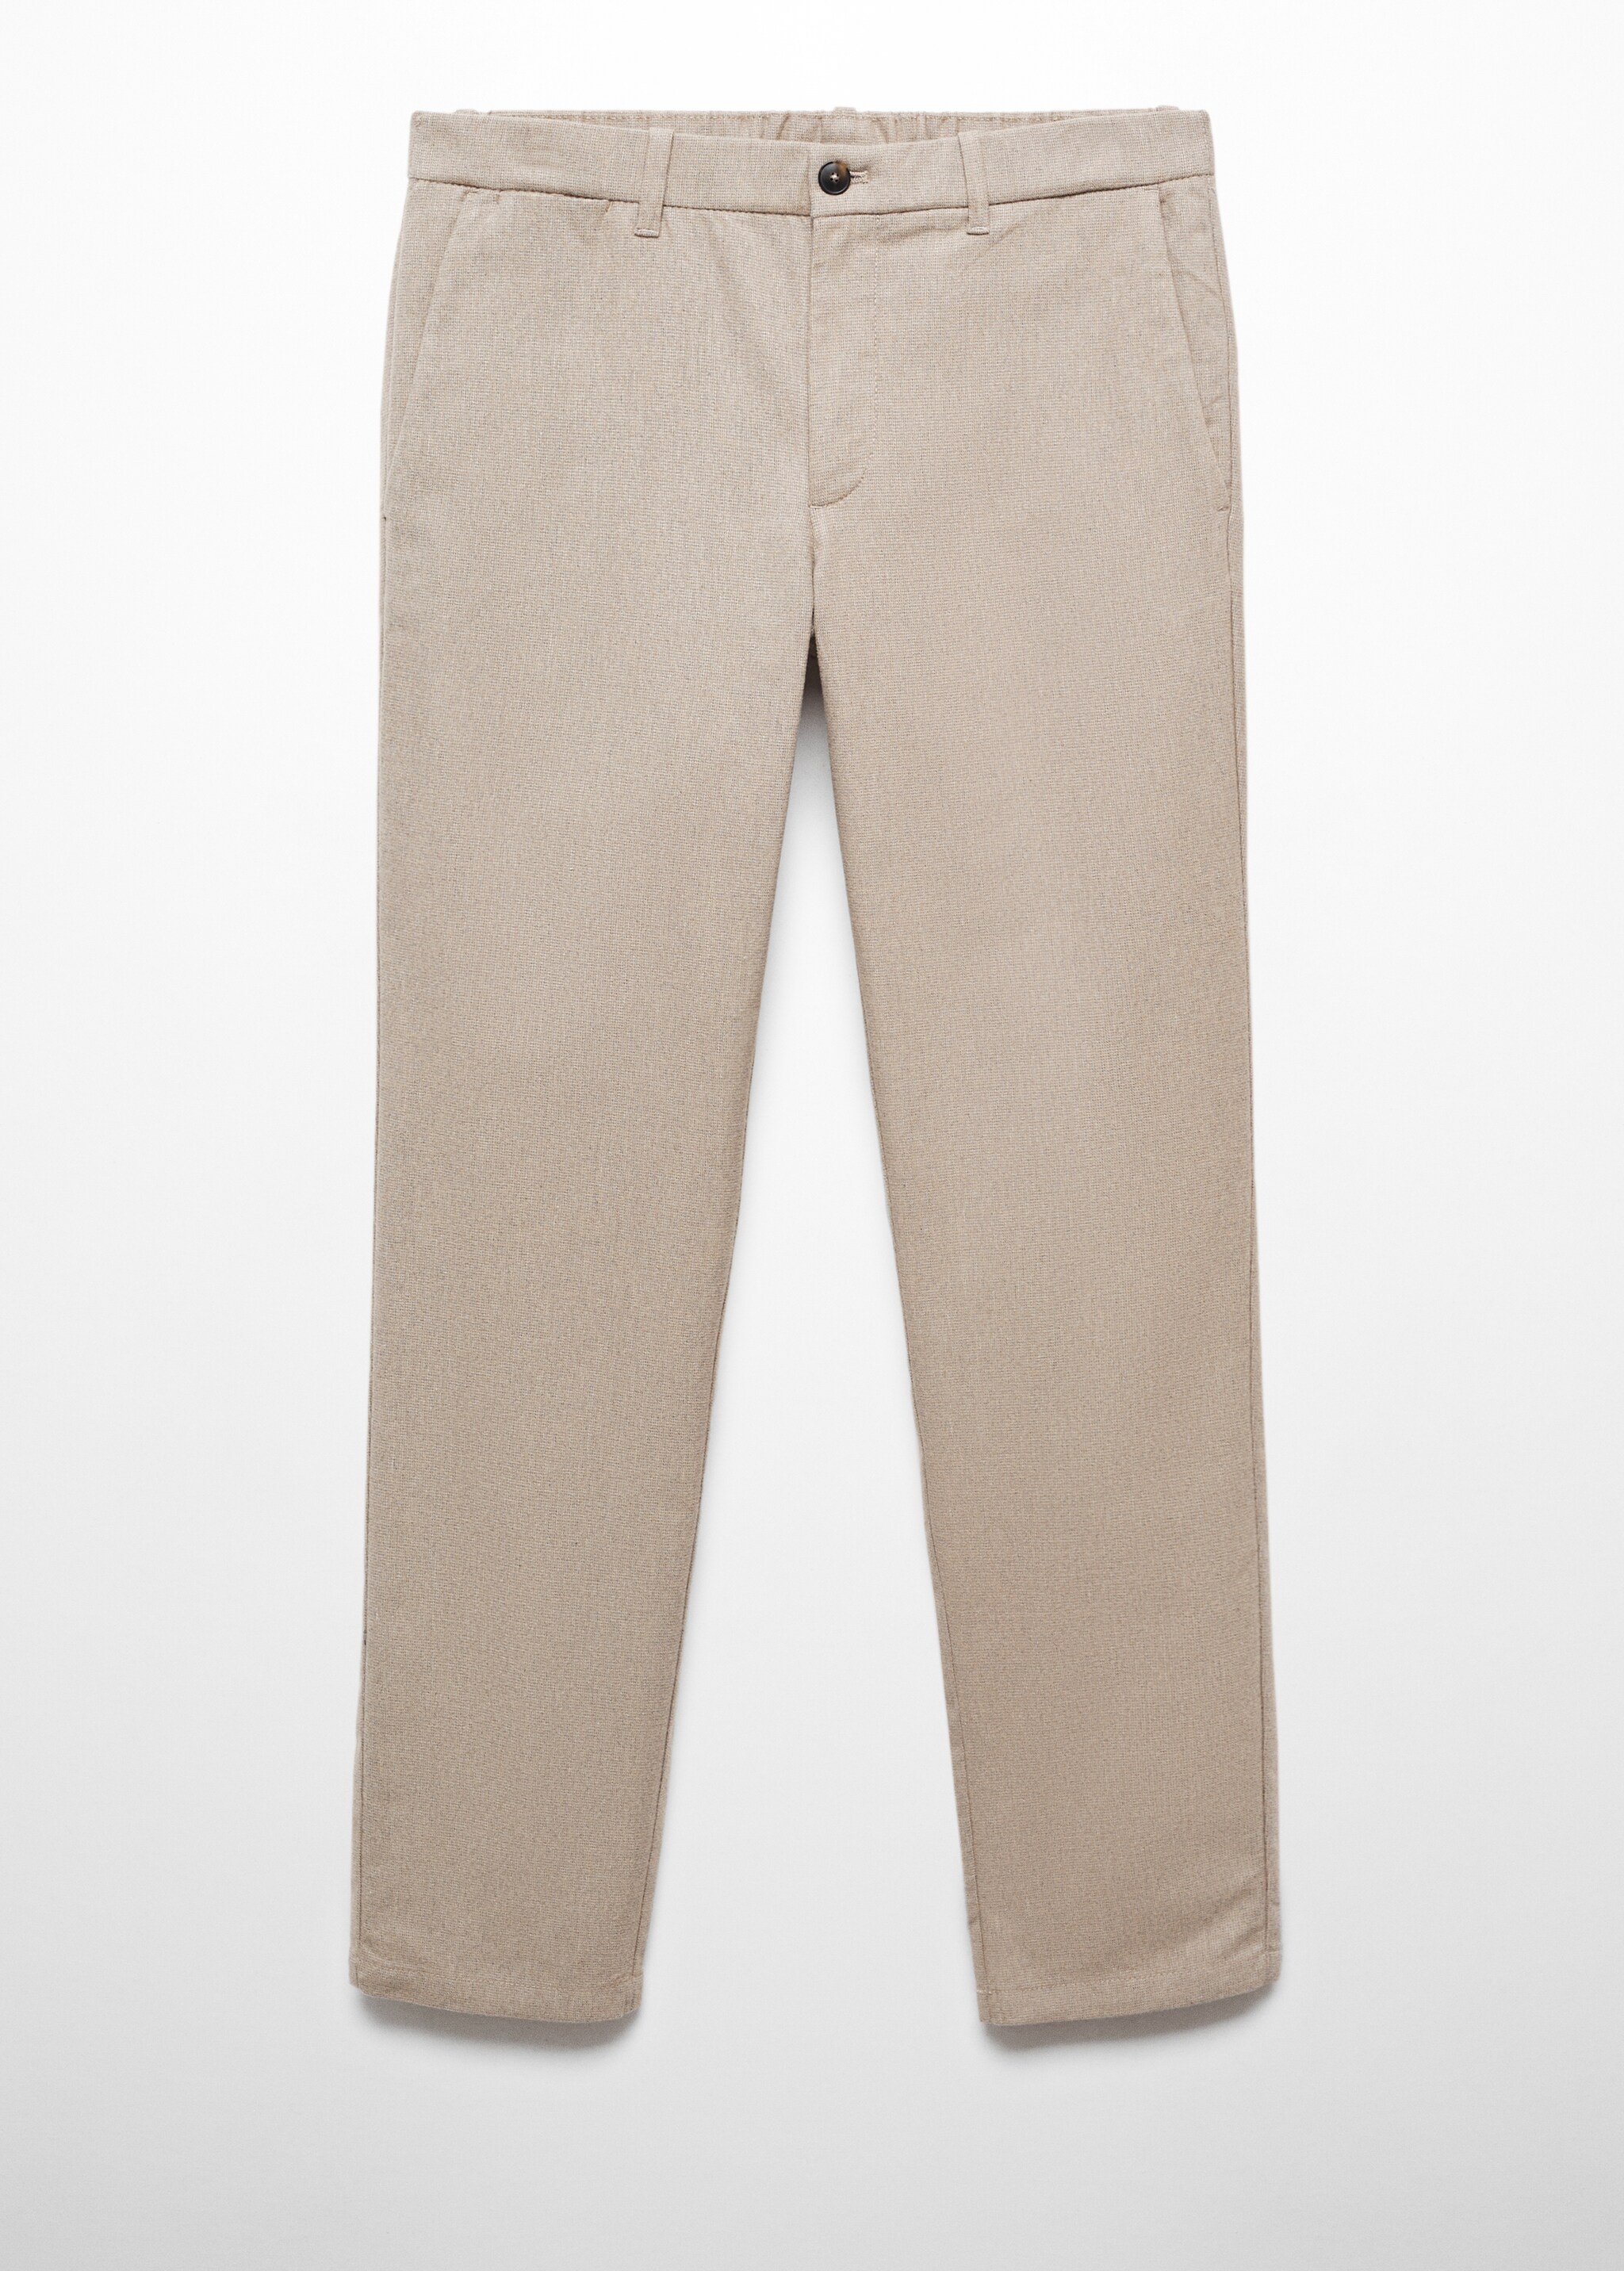 Slim fit structured cotton trousers - Article without model